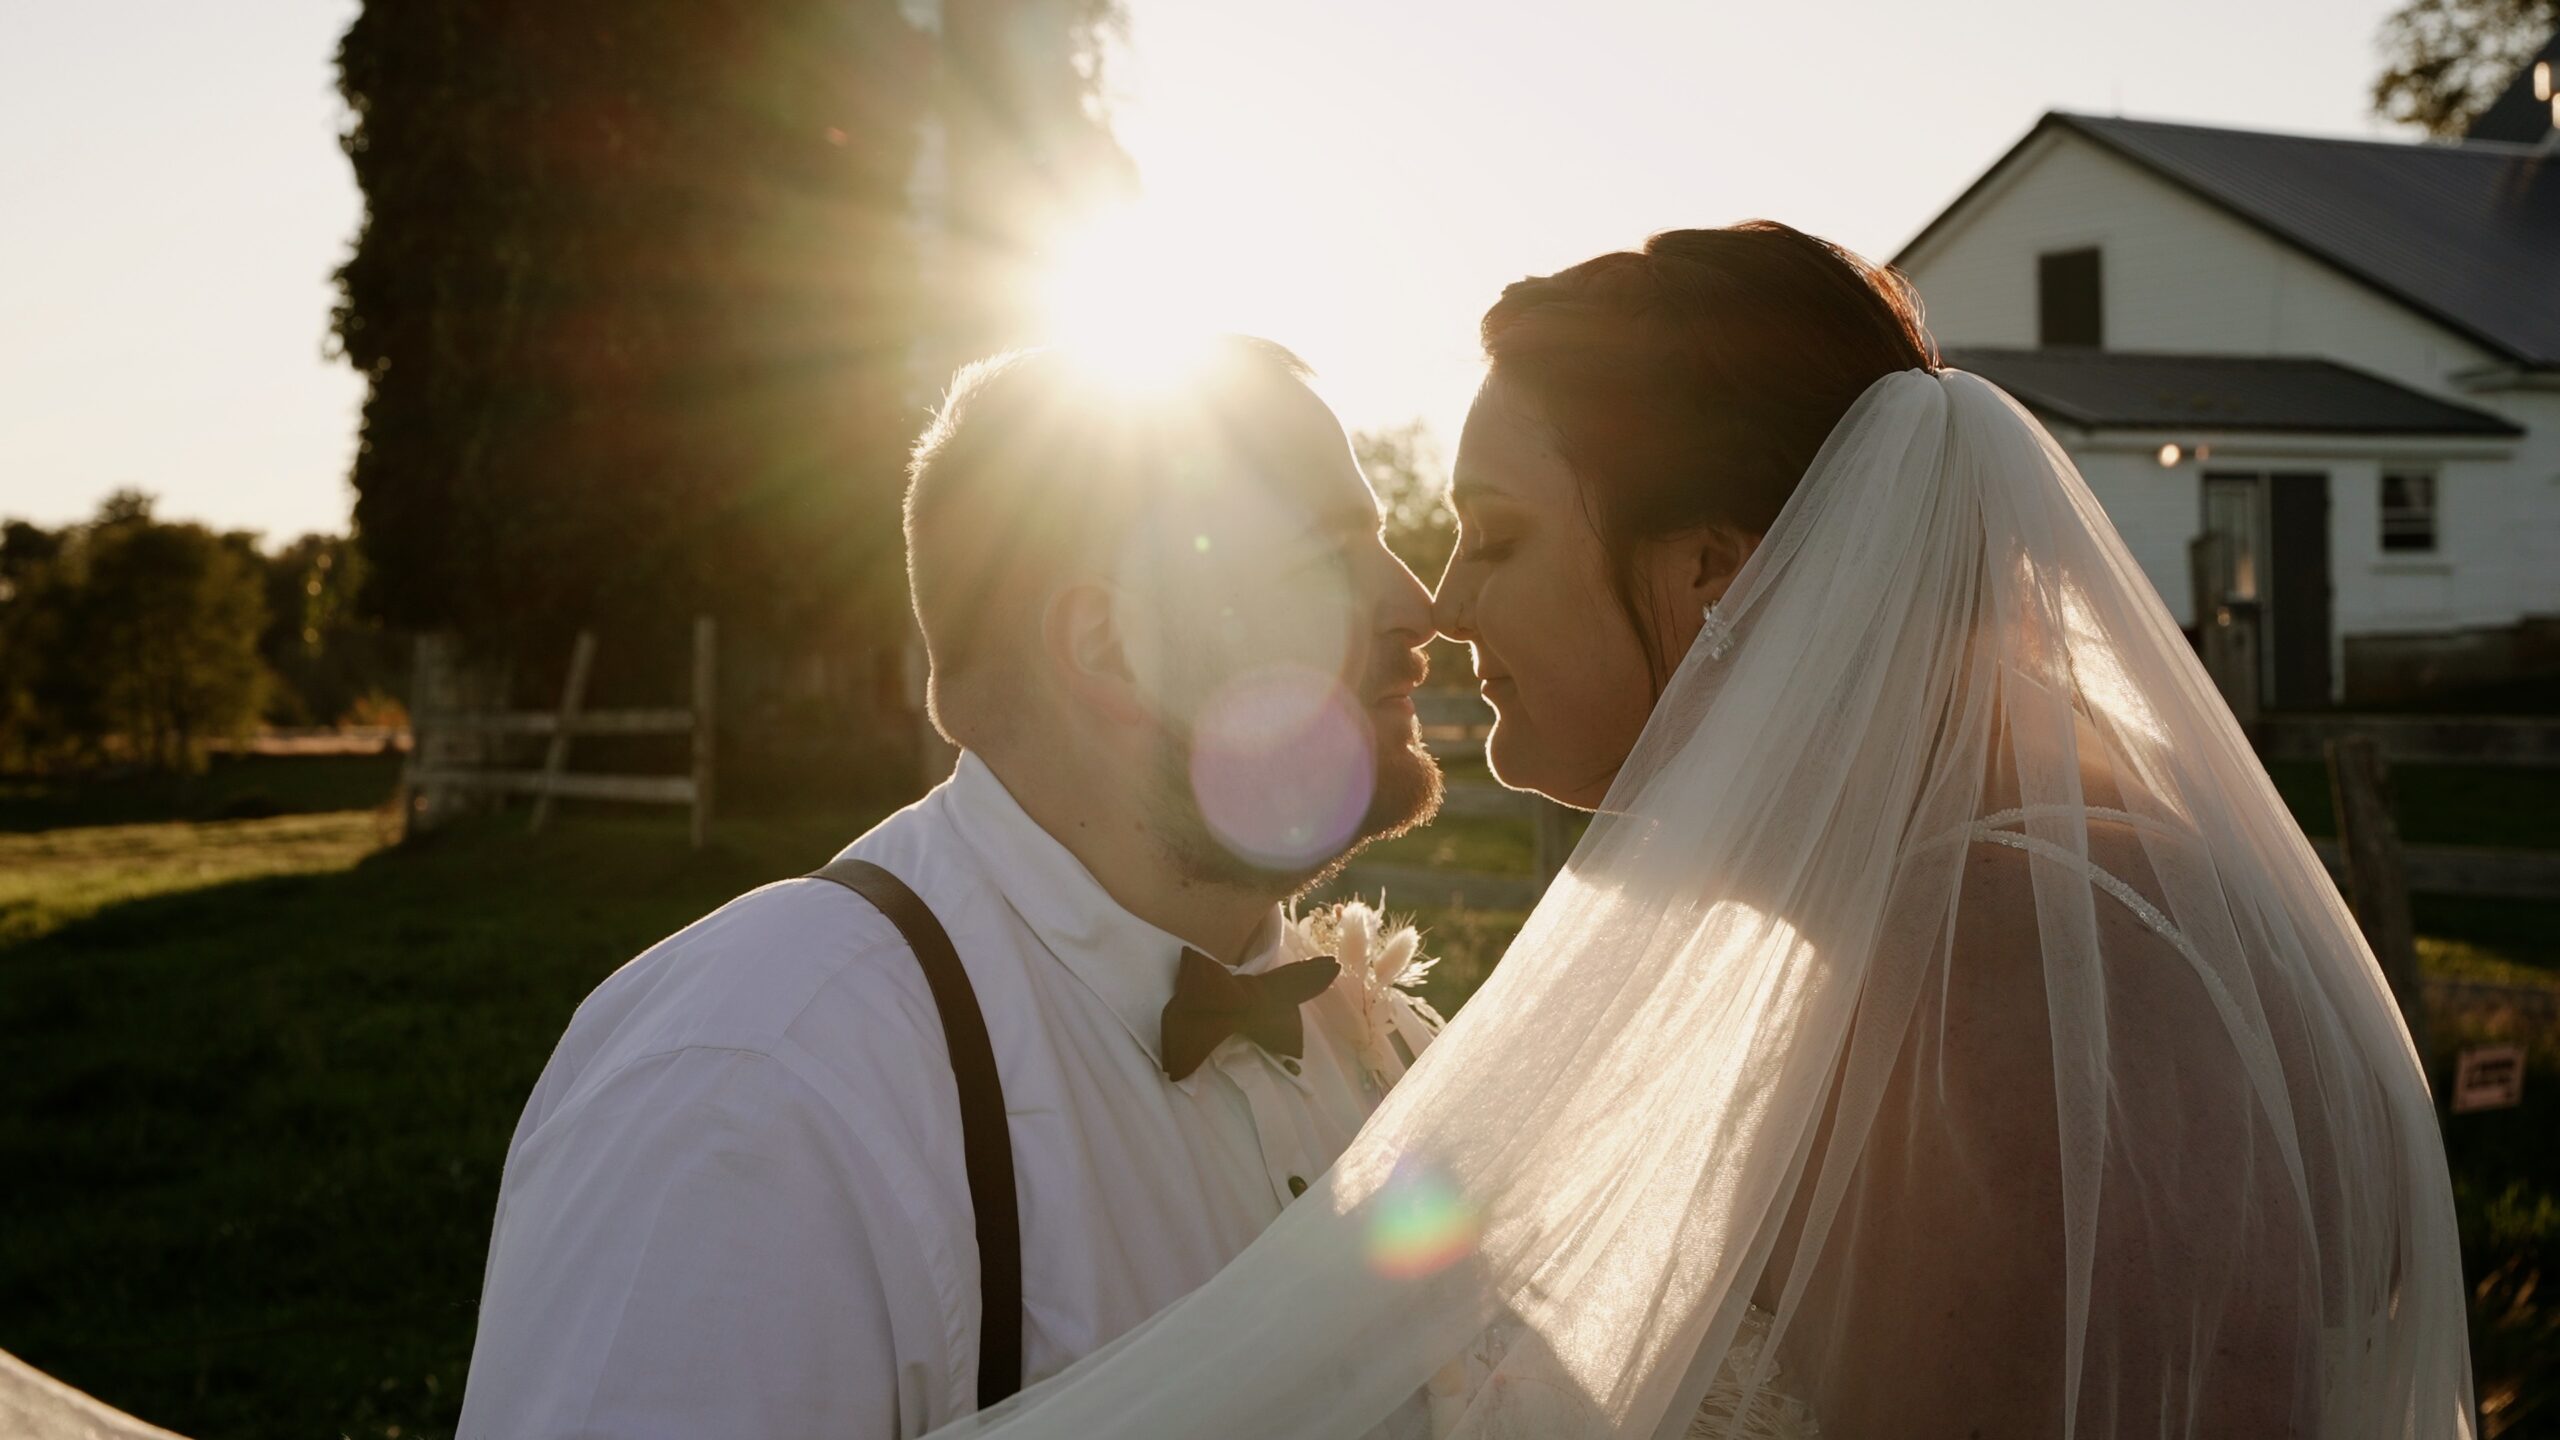 Couple standing in front of a barn and a silo covered with ivy. The sun is setting and causing a solar flare. Their noses are touching. The bride's veil is sweeping from her hair to the left of the frame. Groom is wearing a white button up, suspenders and a bowtie